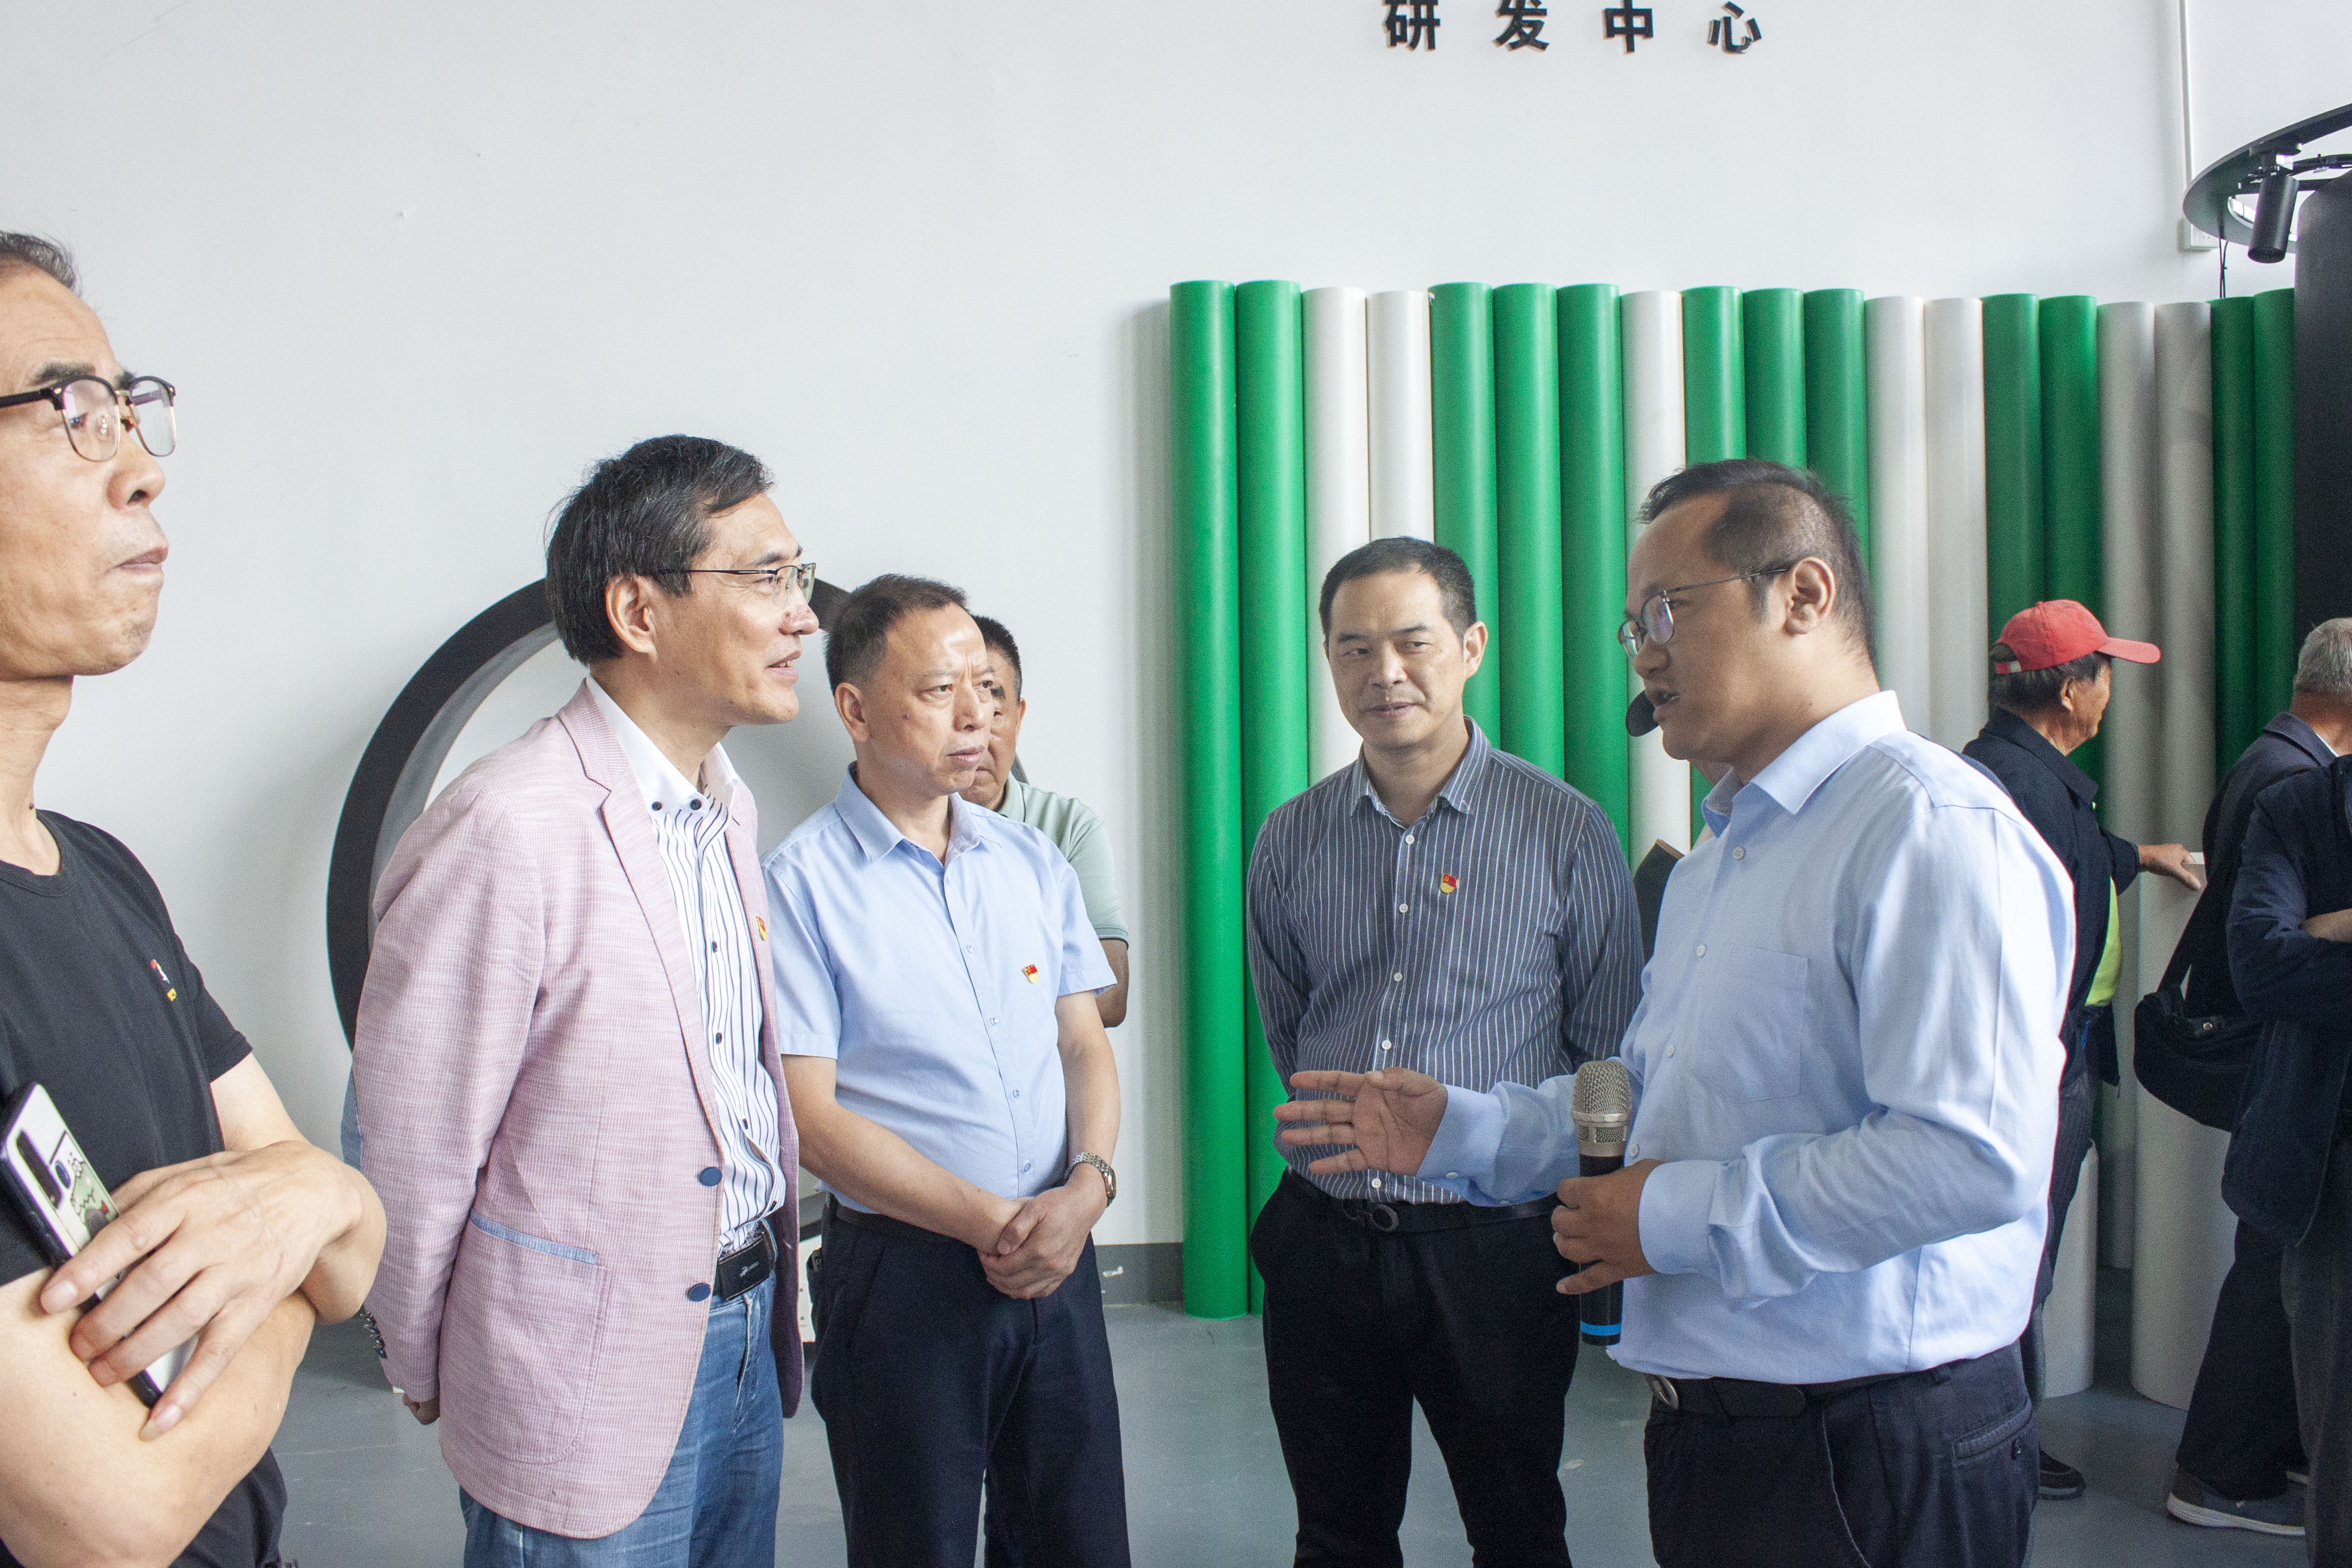 Veteran cadres from Zhangjiagang city visited Grace Machinery